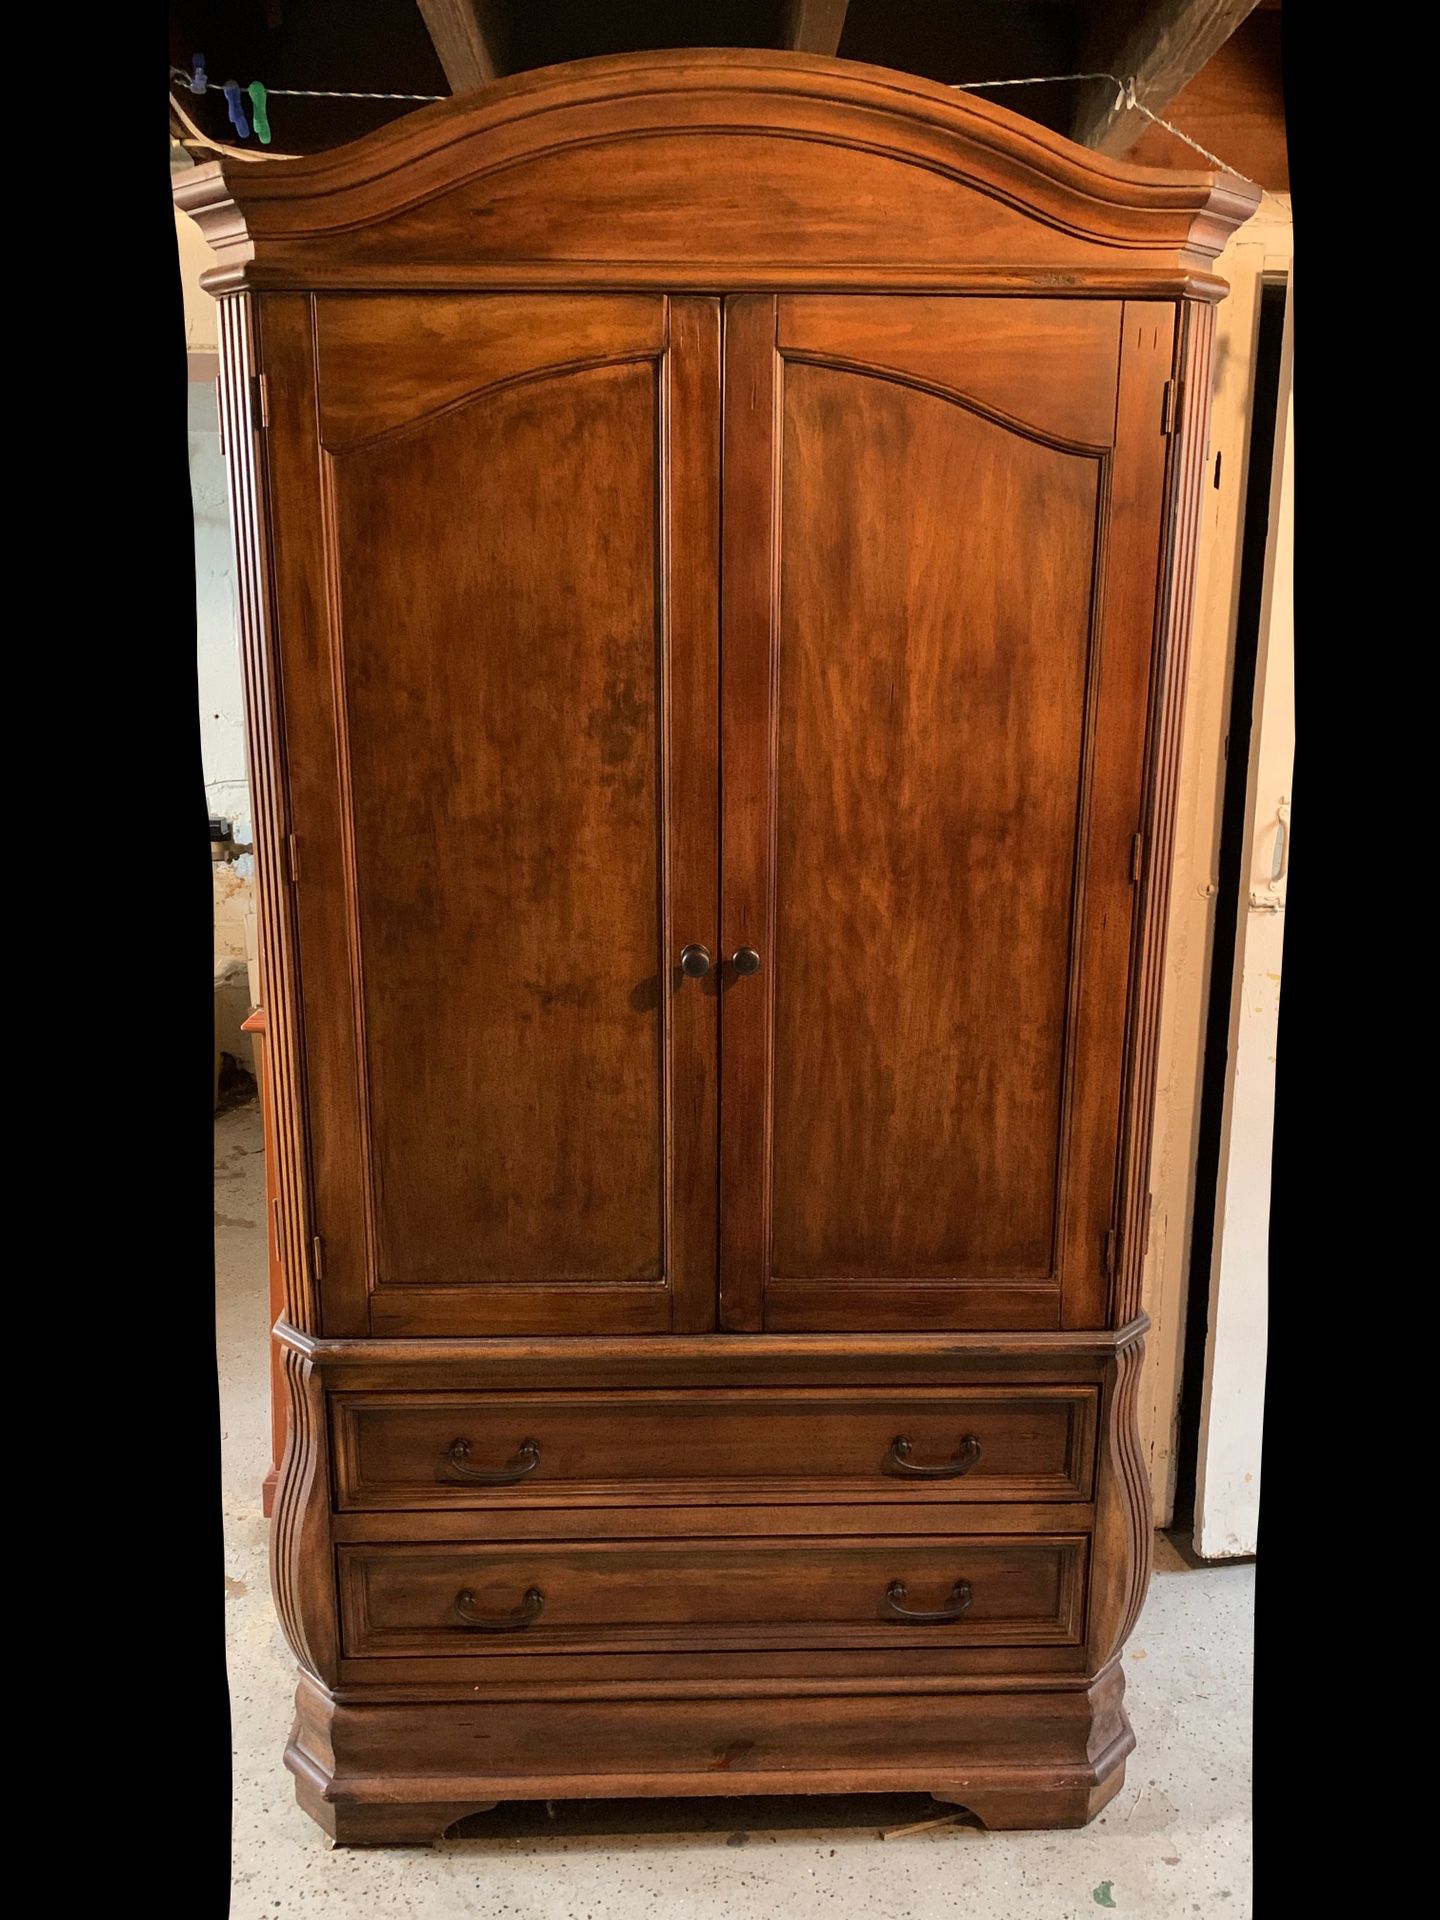 Armoire. Two drawers and top opens for tv or storage. 80.5” tall x 44” wide x 23.5” deep